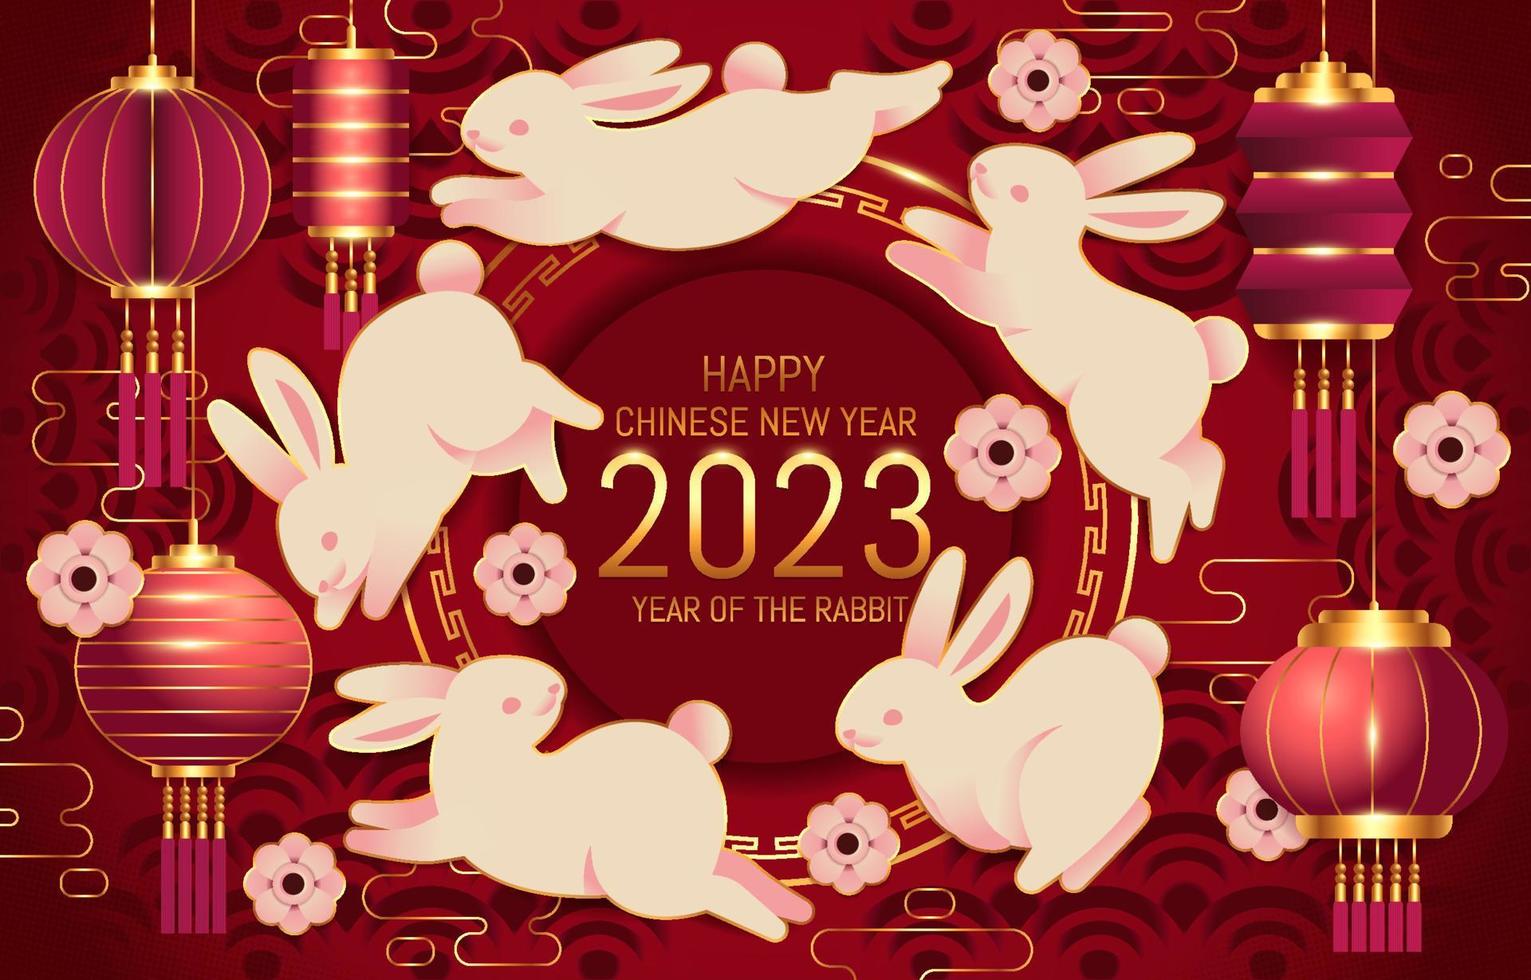 New Year With Red Lanterns And Rabbits vector